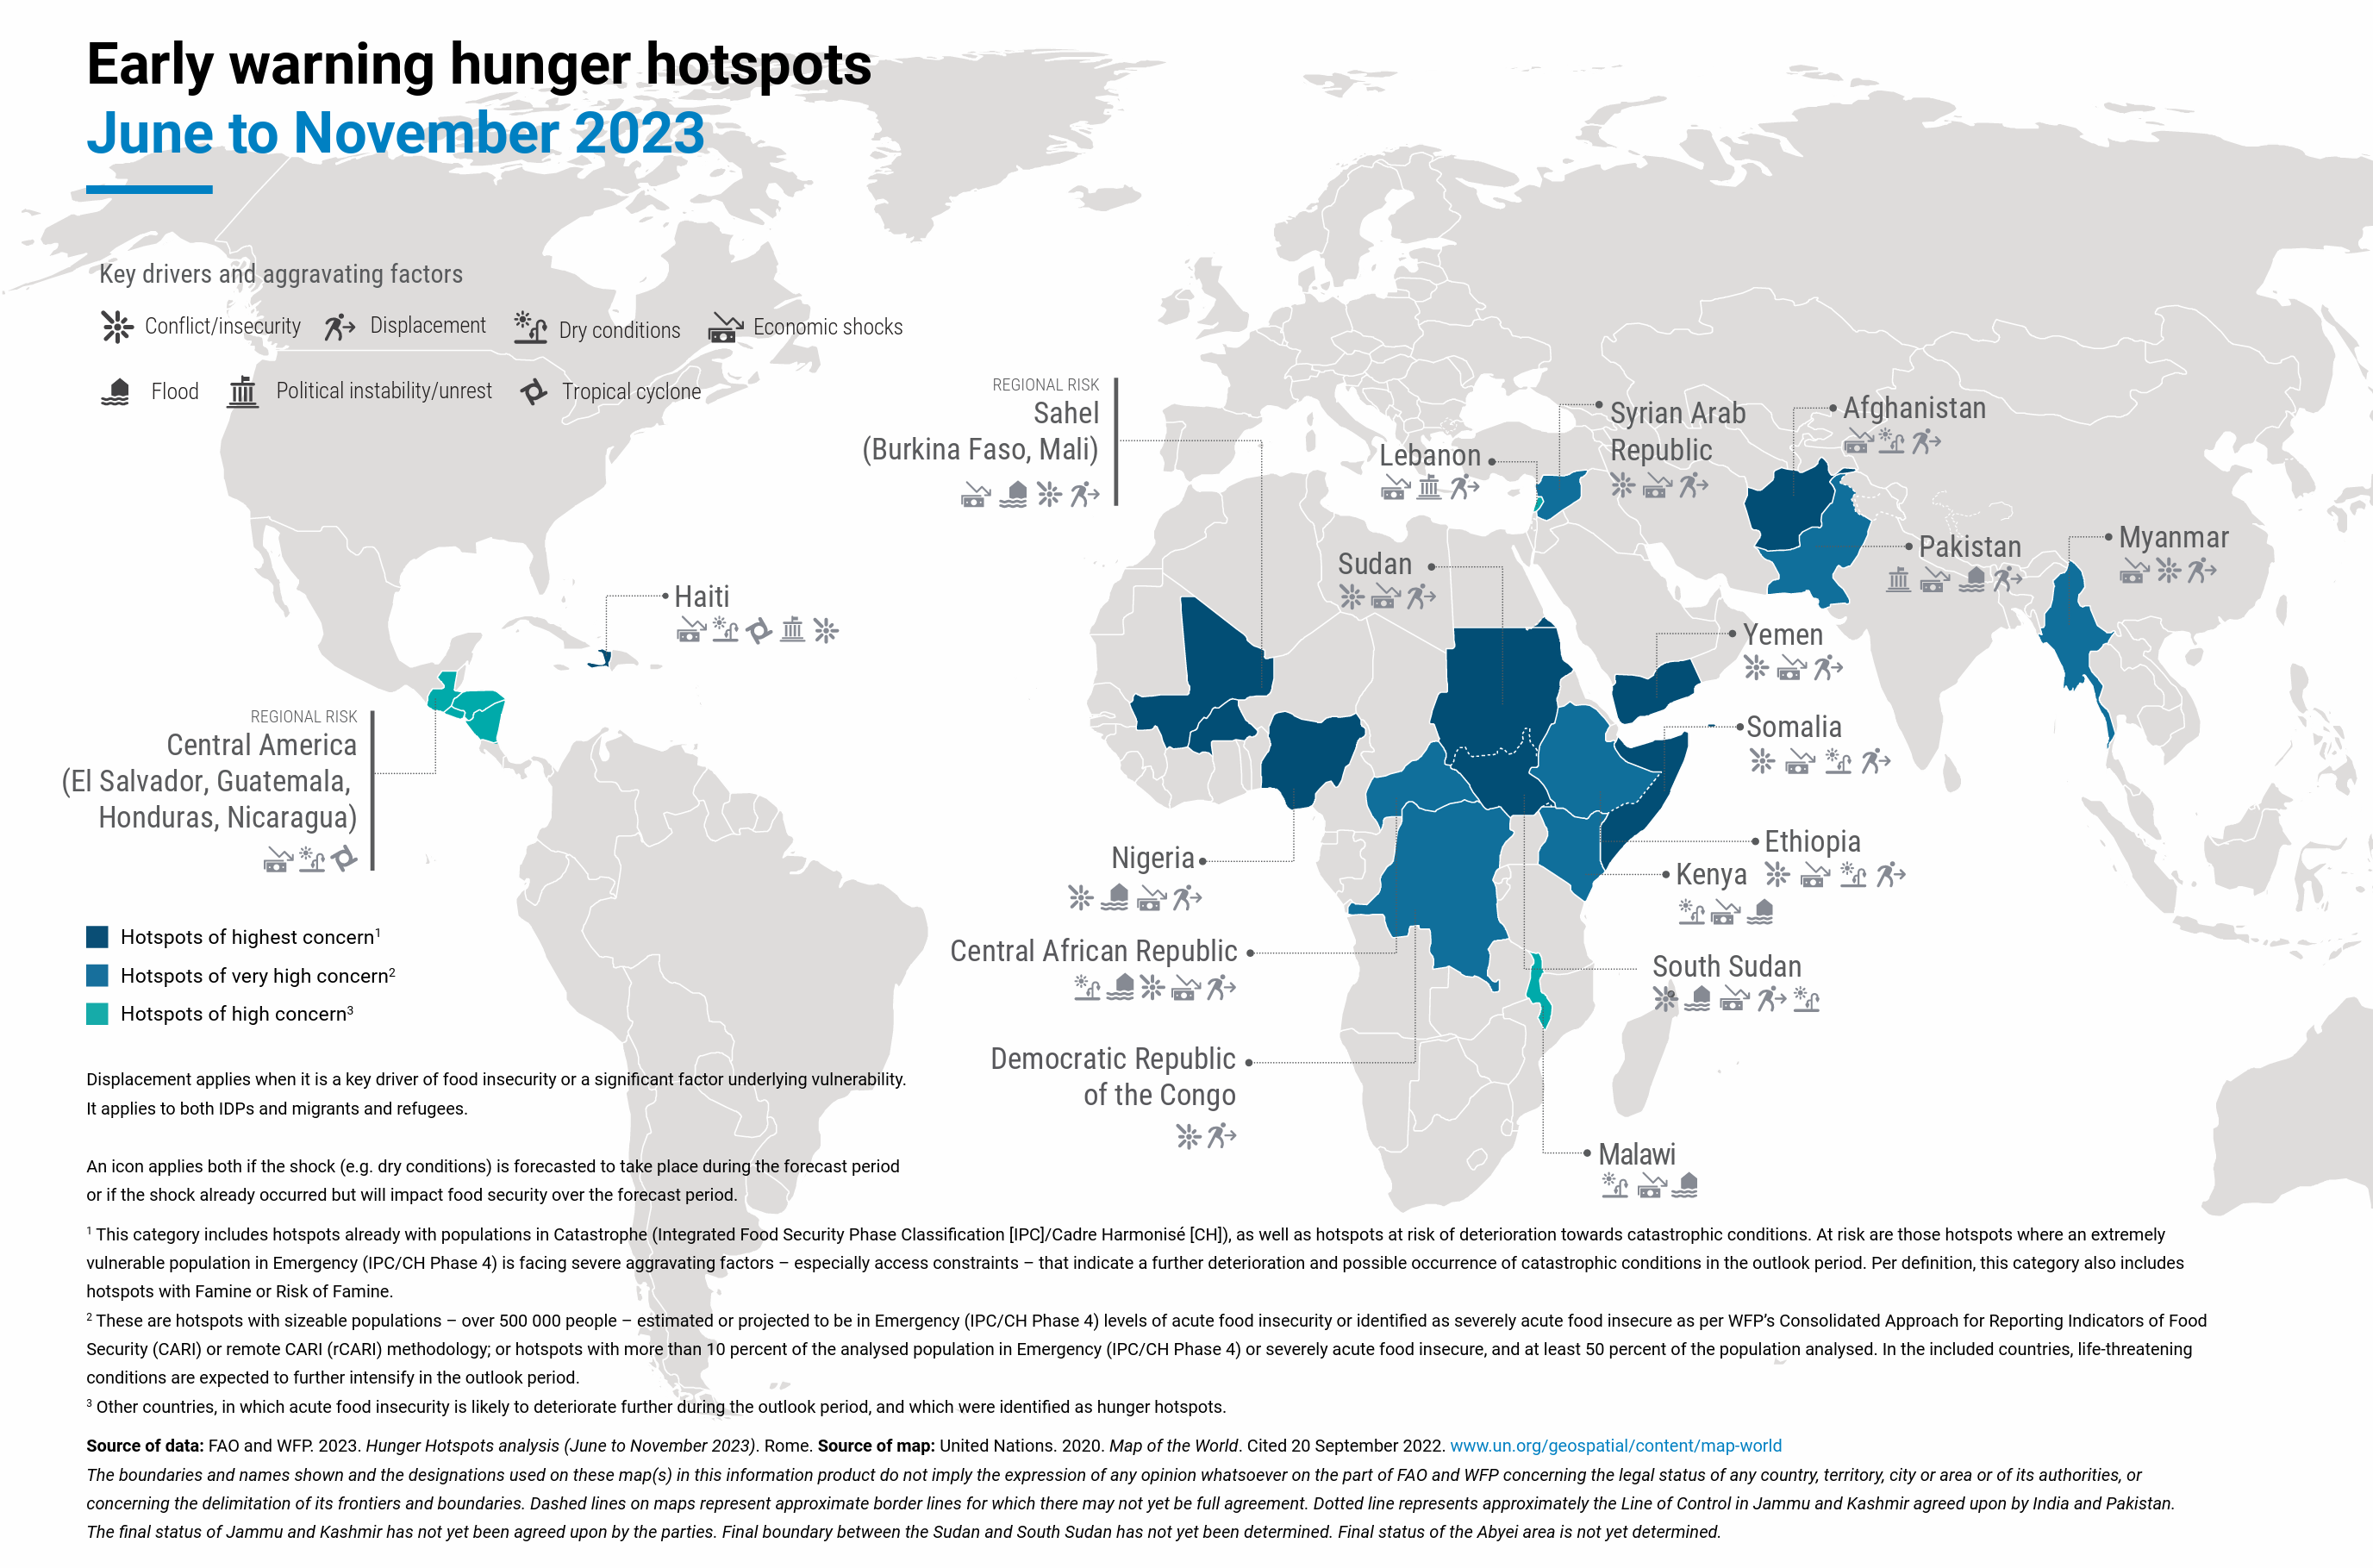 Map showing early warning hunger hotspots, June-November 2023. Hunger was set to worsen in 18 “hotspots” worldwide including Sudan, where fighting put people at risk of starvation, the Food and Agriculture Organization (FAO) and the World Food Programme (WFP) warned in a report published on Monday, 29 May 2023. Sudan, Burkina Faso, Haiti and Mali were elevated to the highest alert level, joining Afghanistan, Nigeria, Somalia, South Sudan and Yemen. Graphic: UN FAO